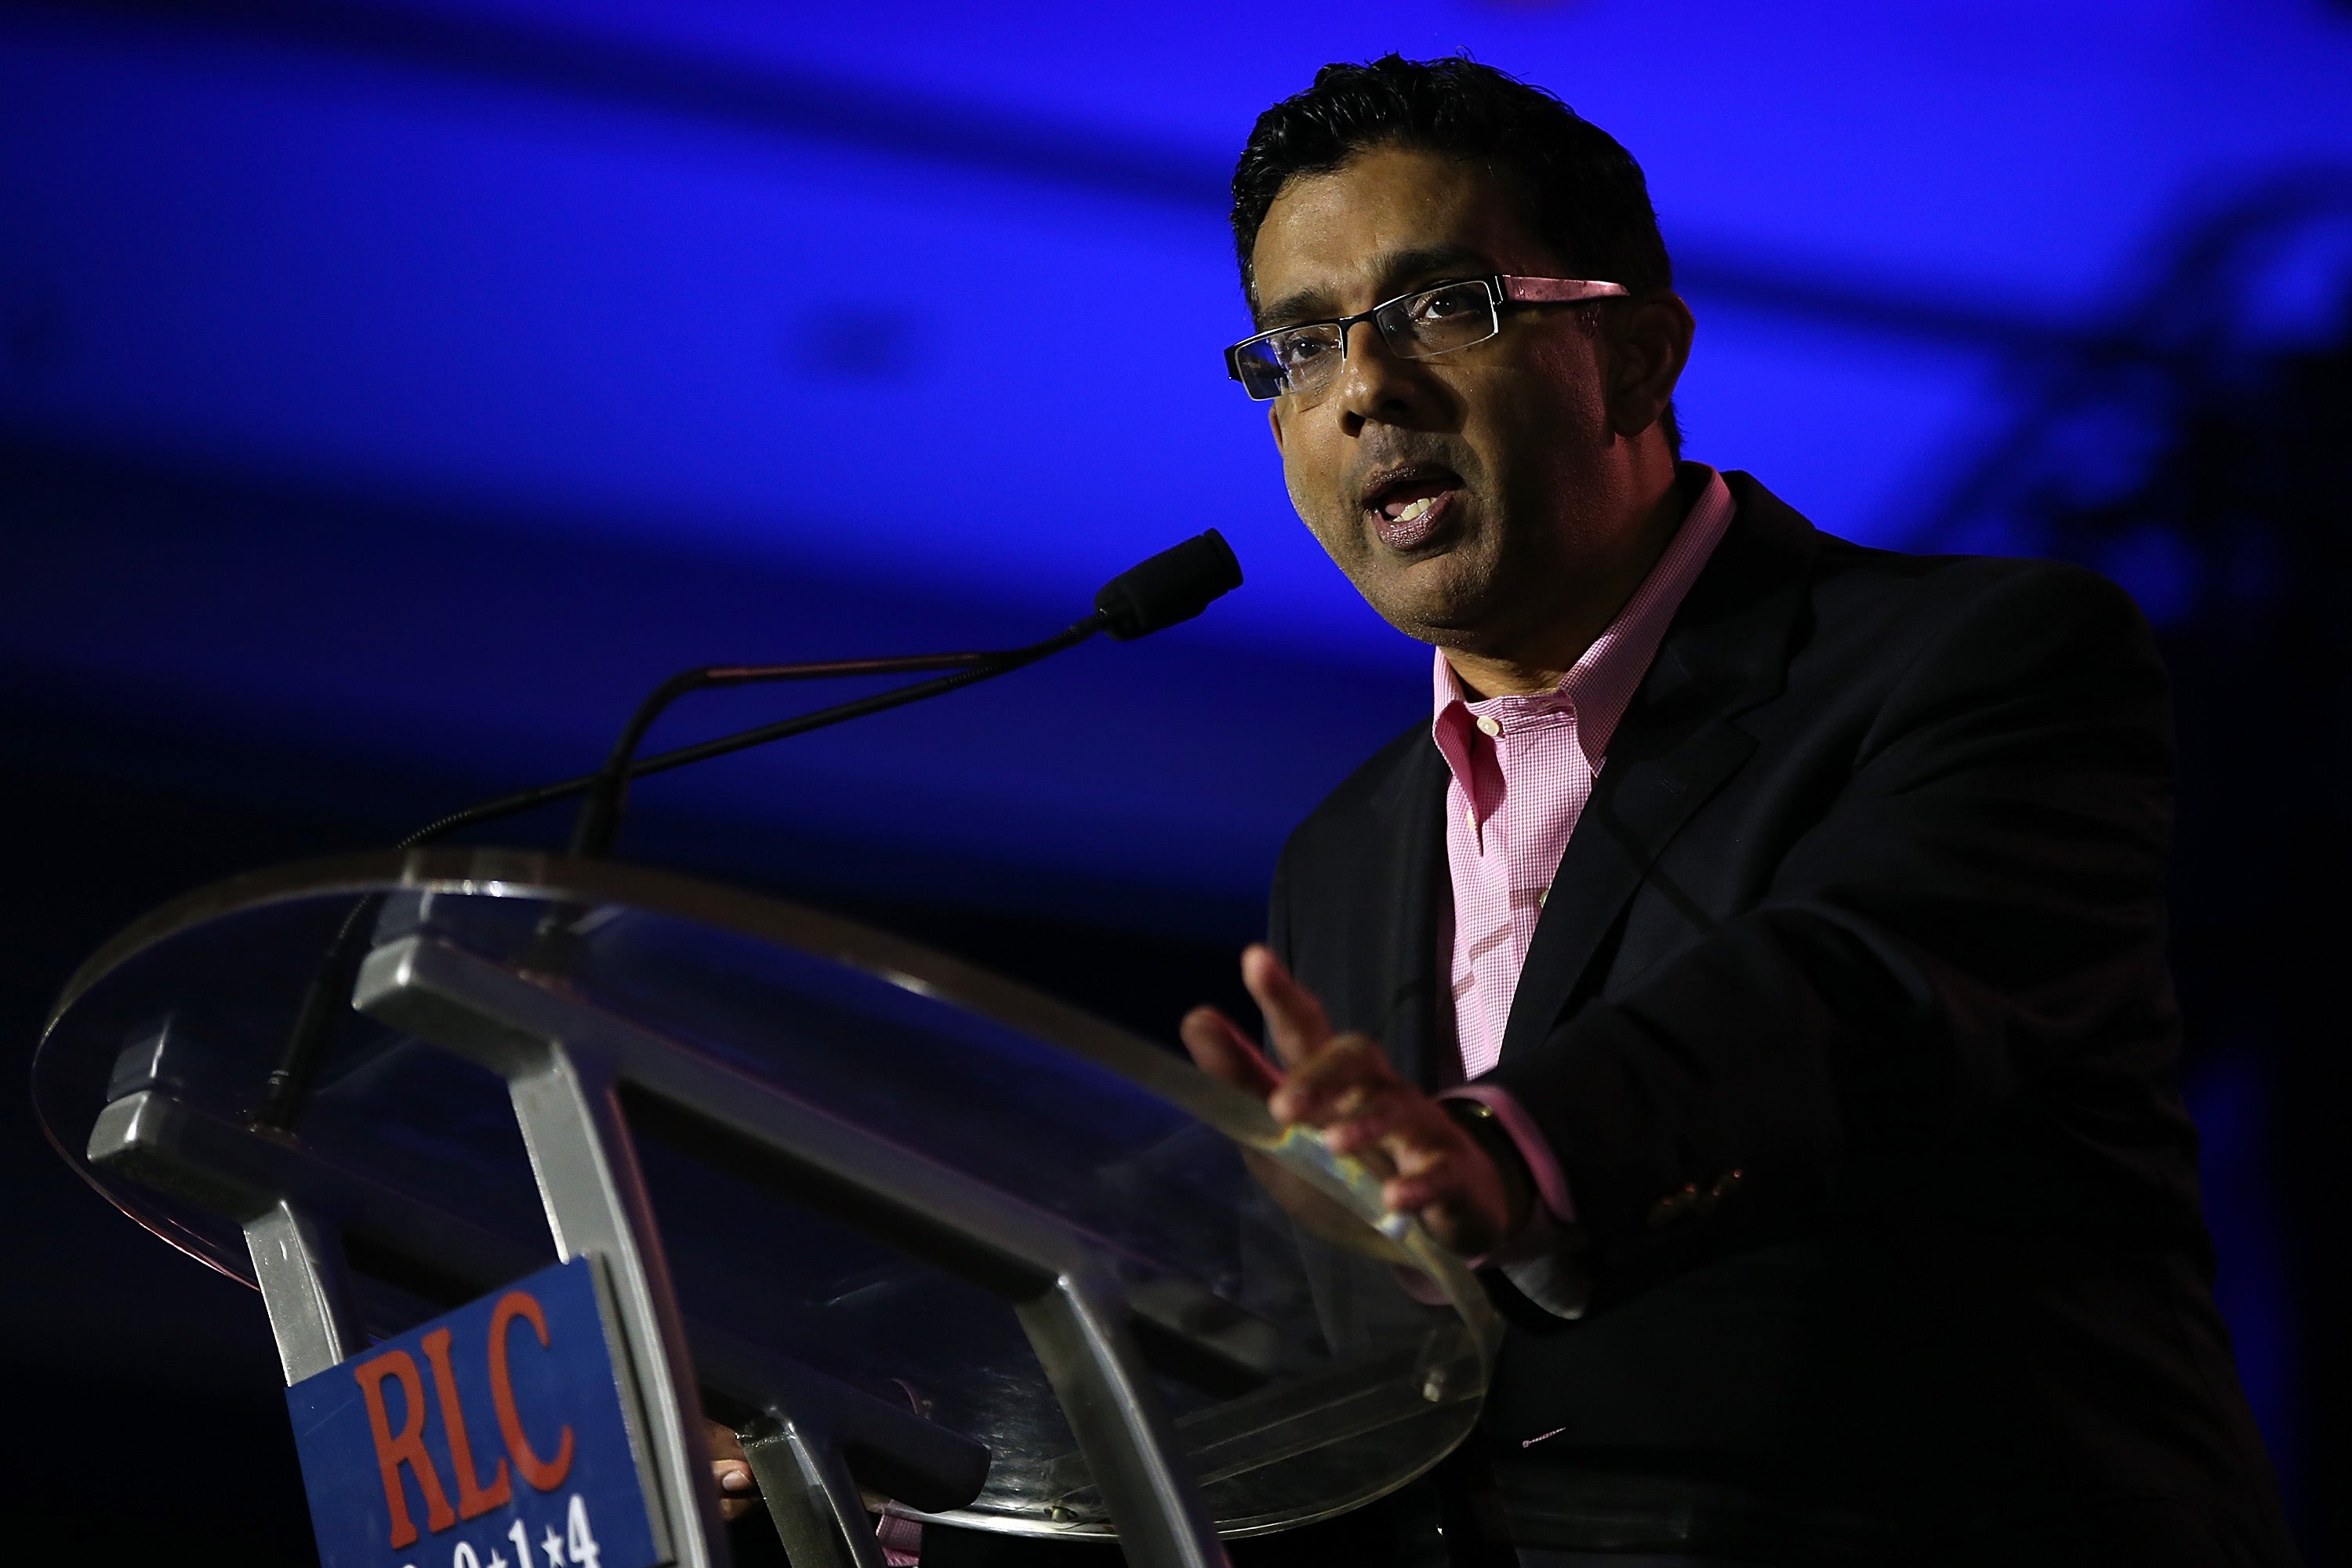 D'Souza speaks into a microphone.